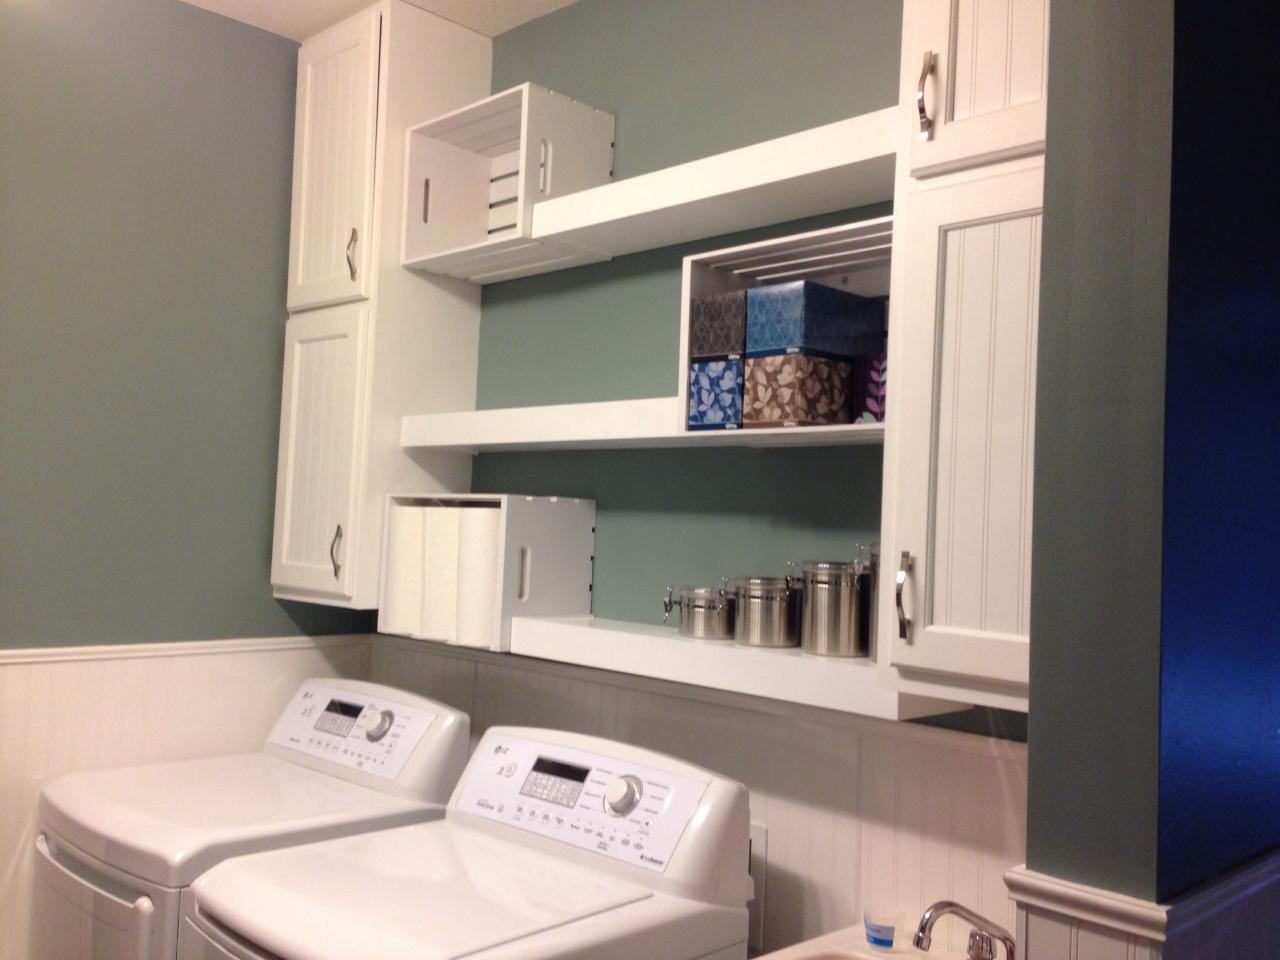 Laundry room shelves. Floating shelf paired with wood crate painted